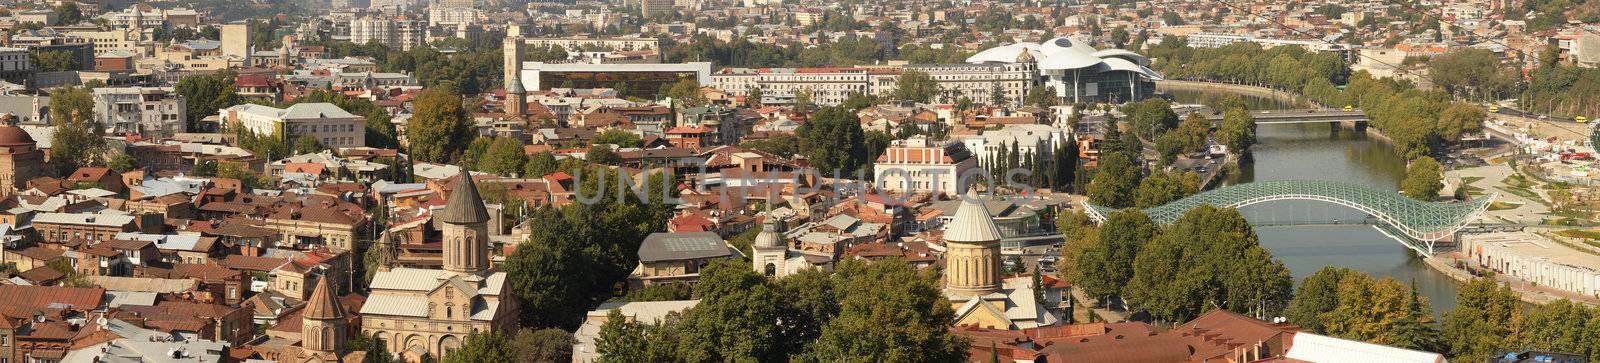 Panoramic view of Old Tbilisi, Republic of Georgia by Elet